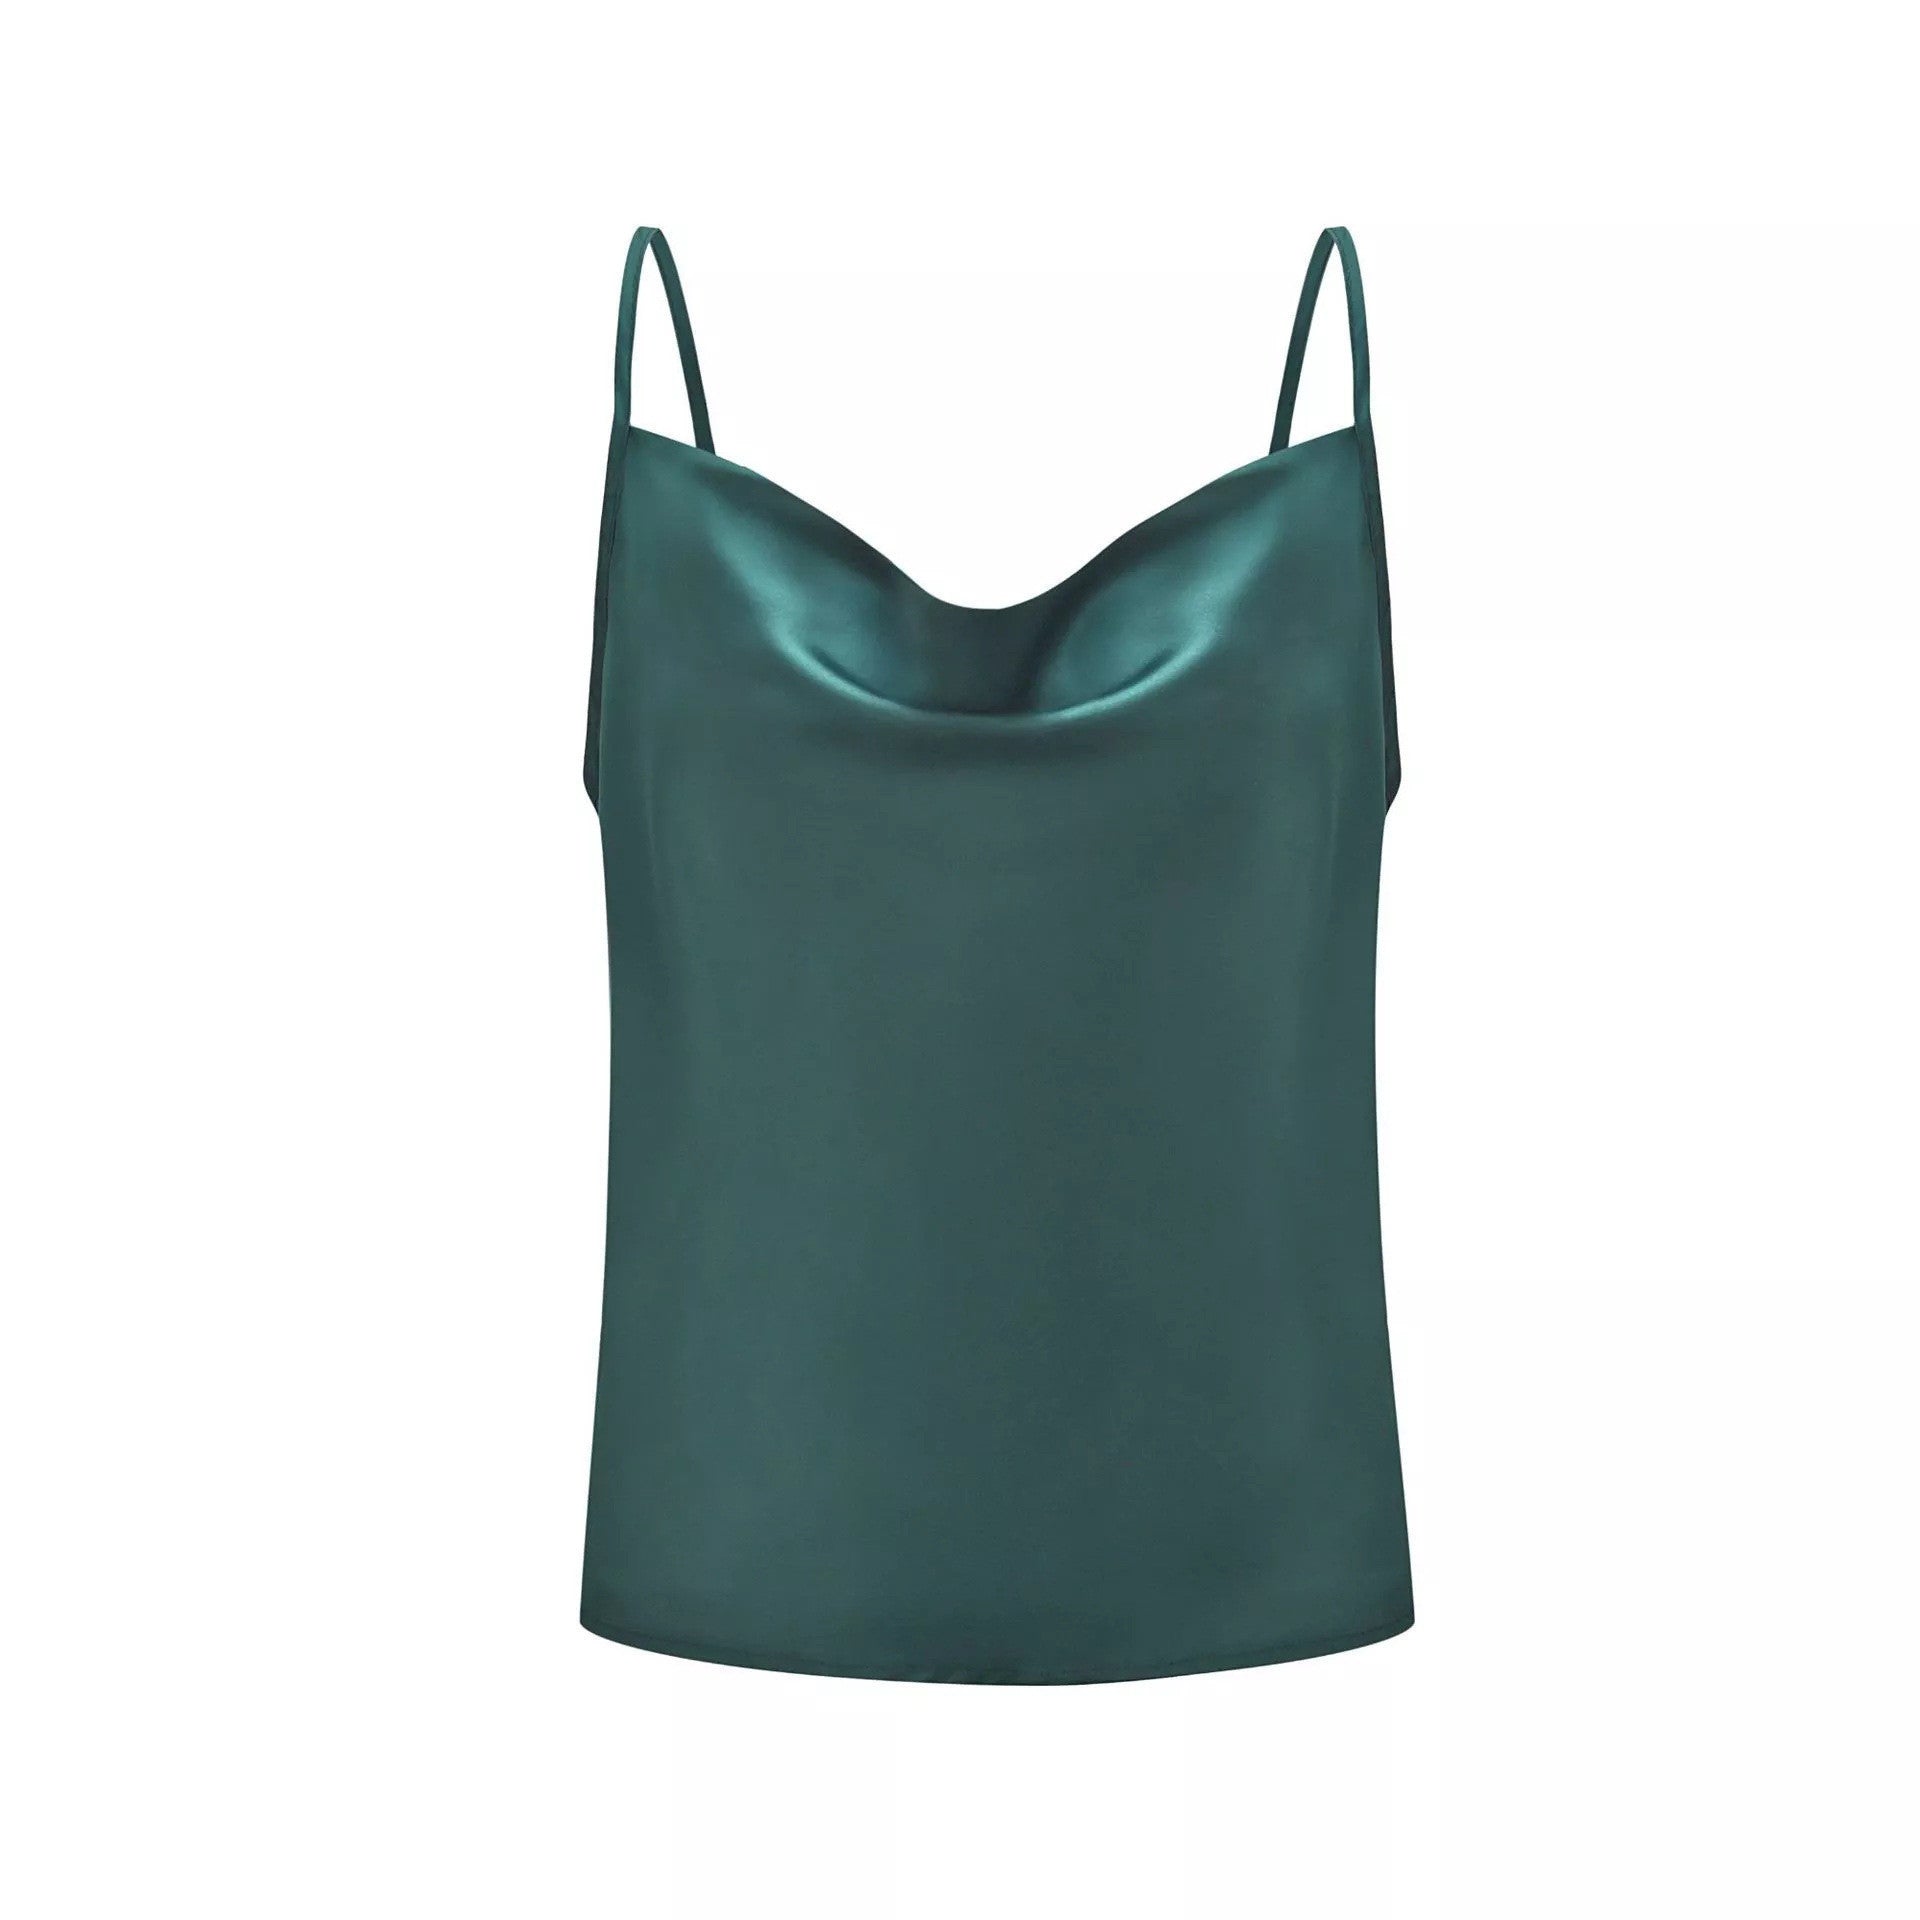 Solid color camisole